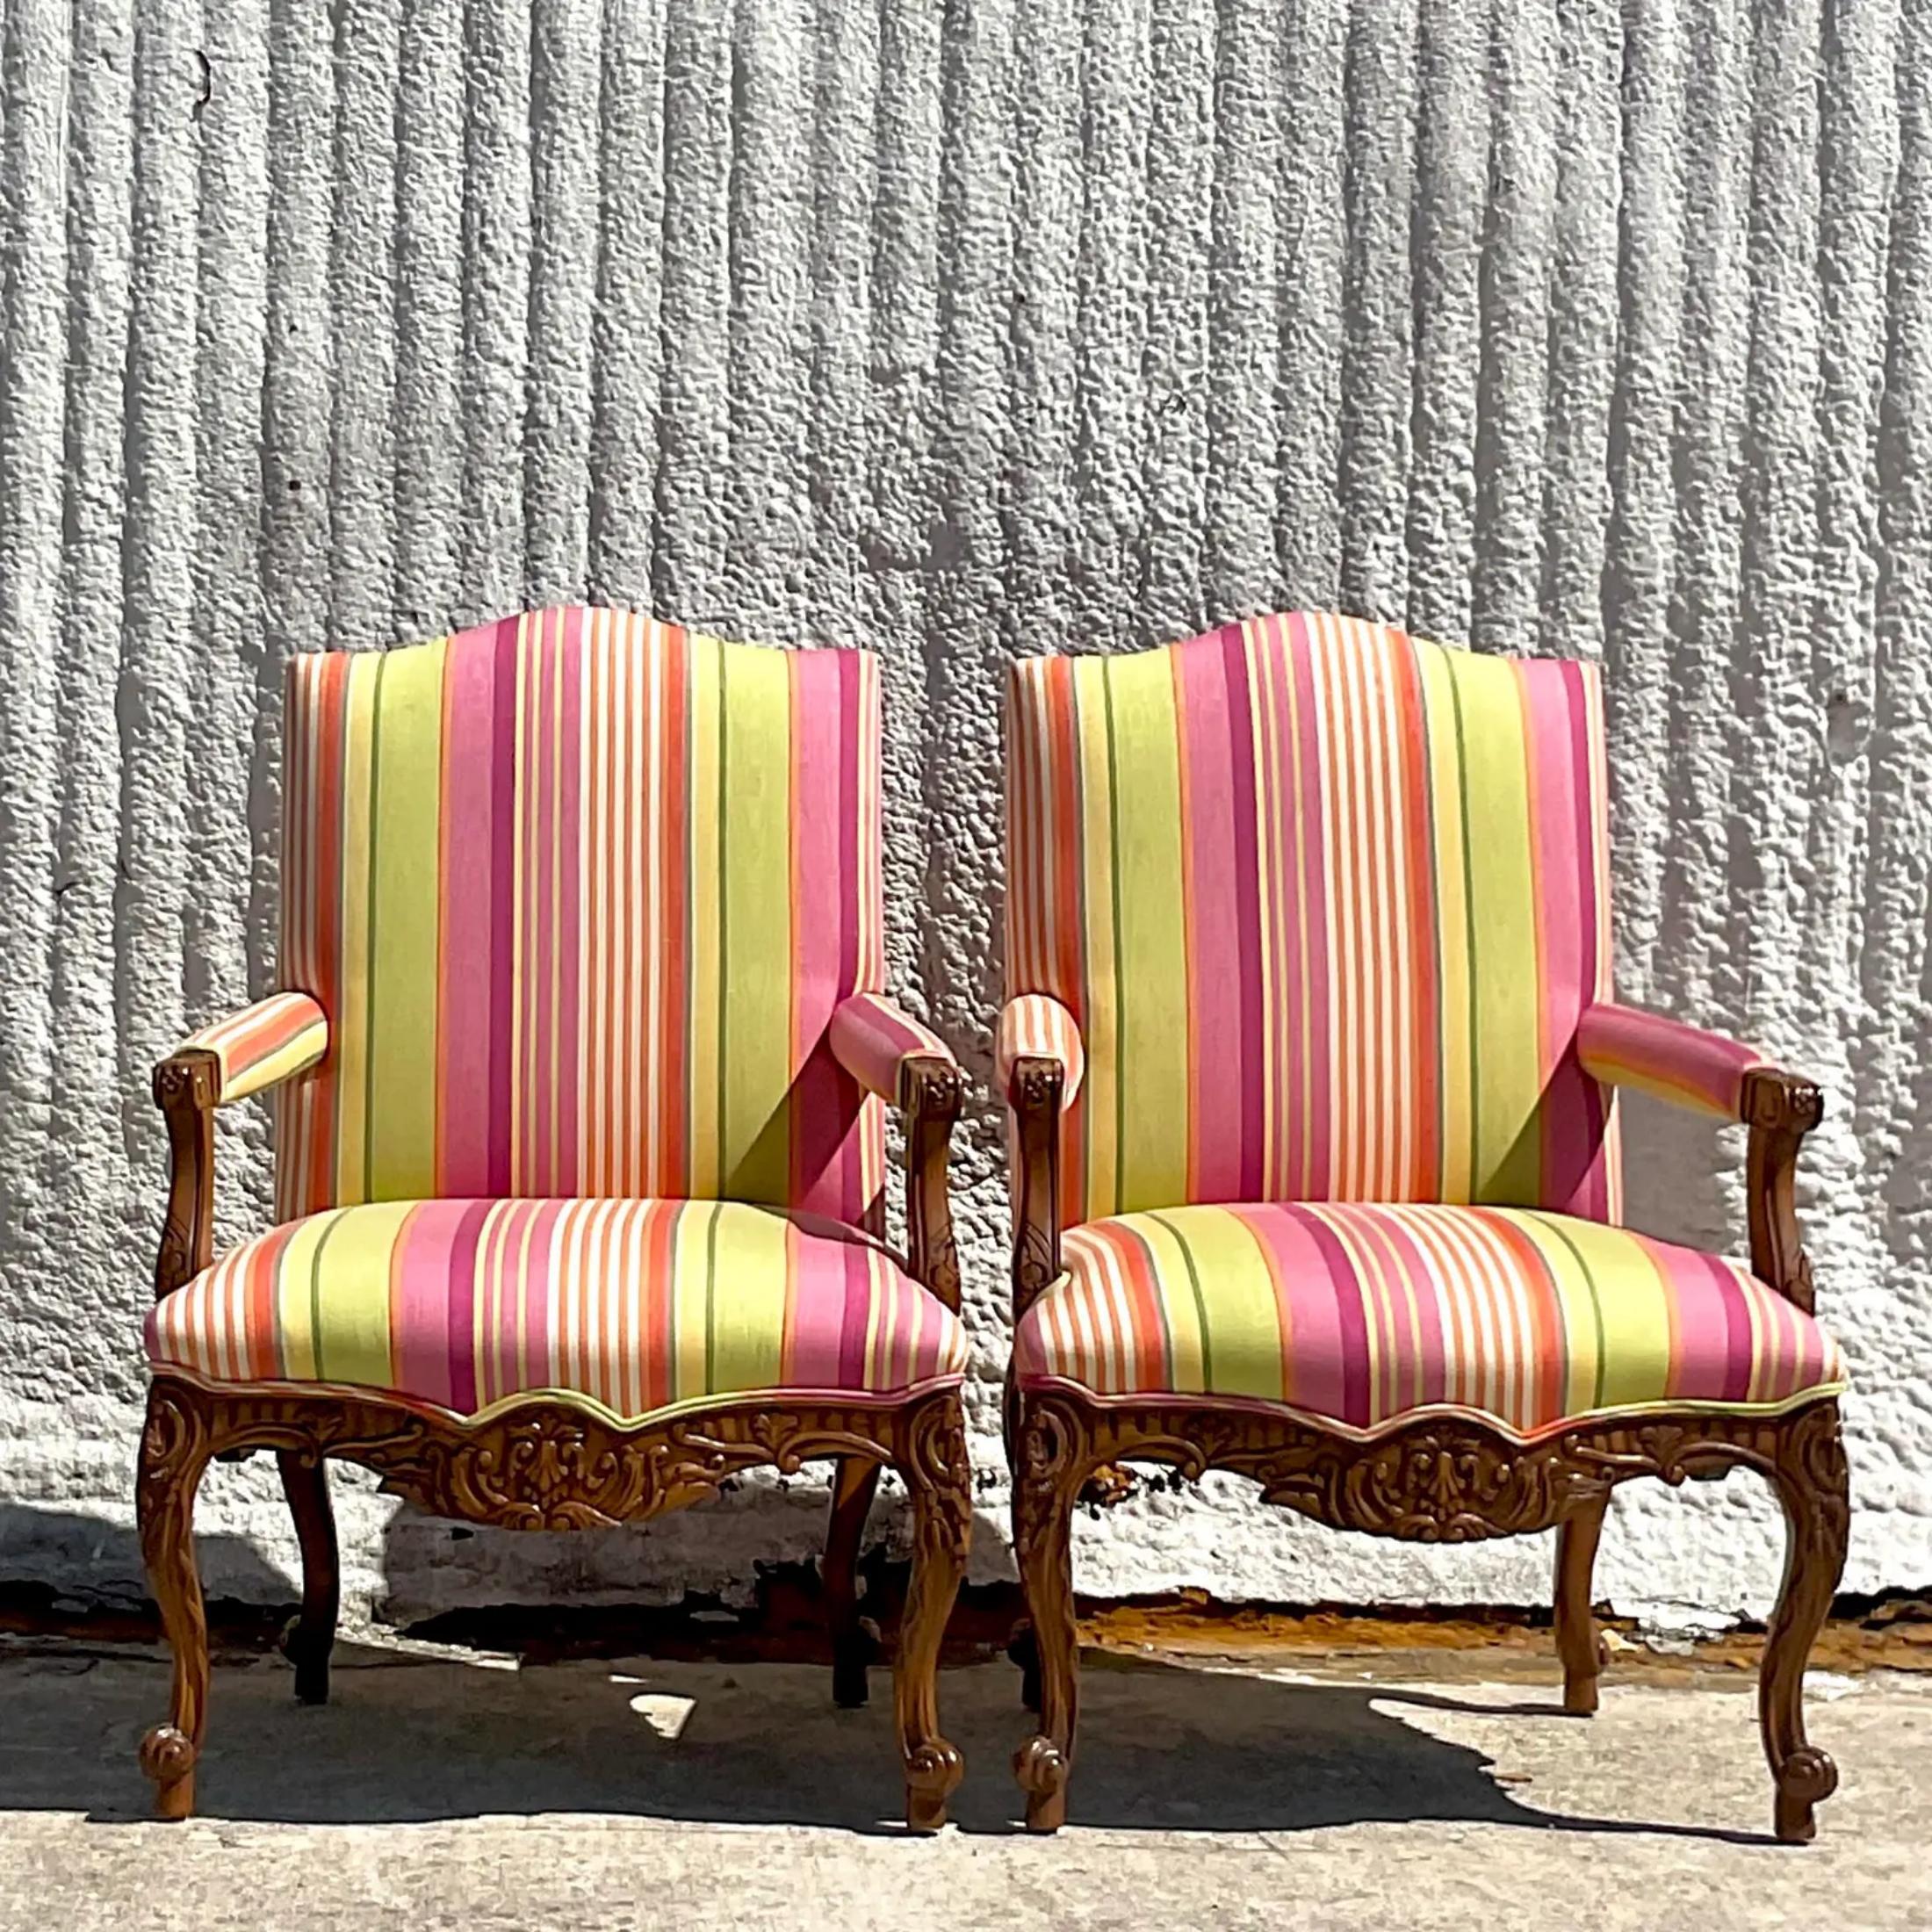 An exceptional pair of vintage Regency Louis XV style chairs. A gorgeous Schumacher strip in brilliant clear colors. Stunning hand carved detail. Acquired from a Palm Bech estate